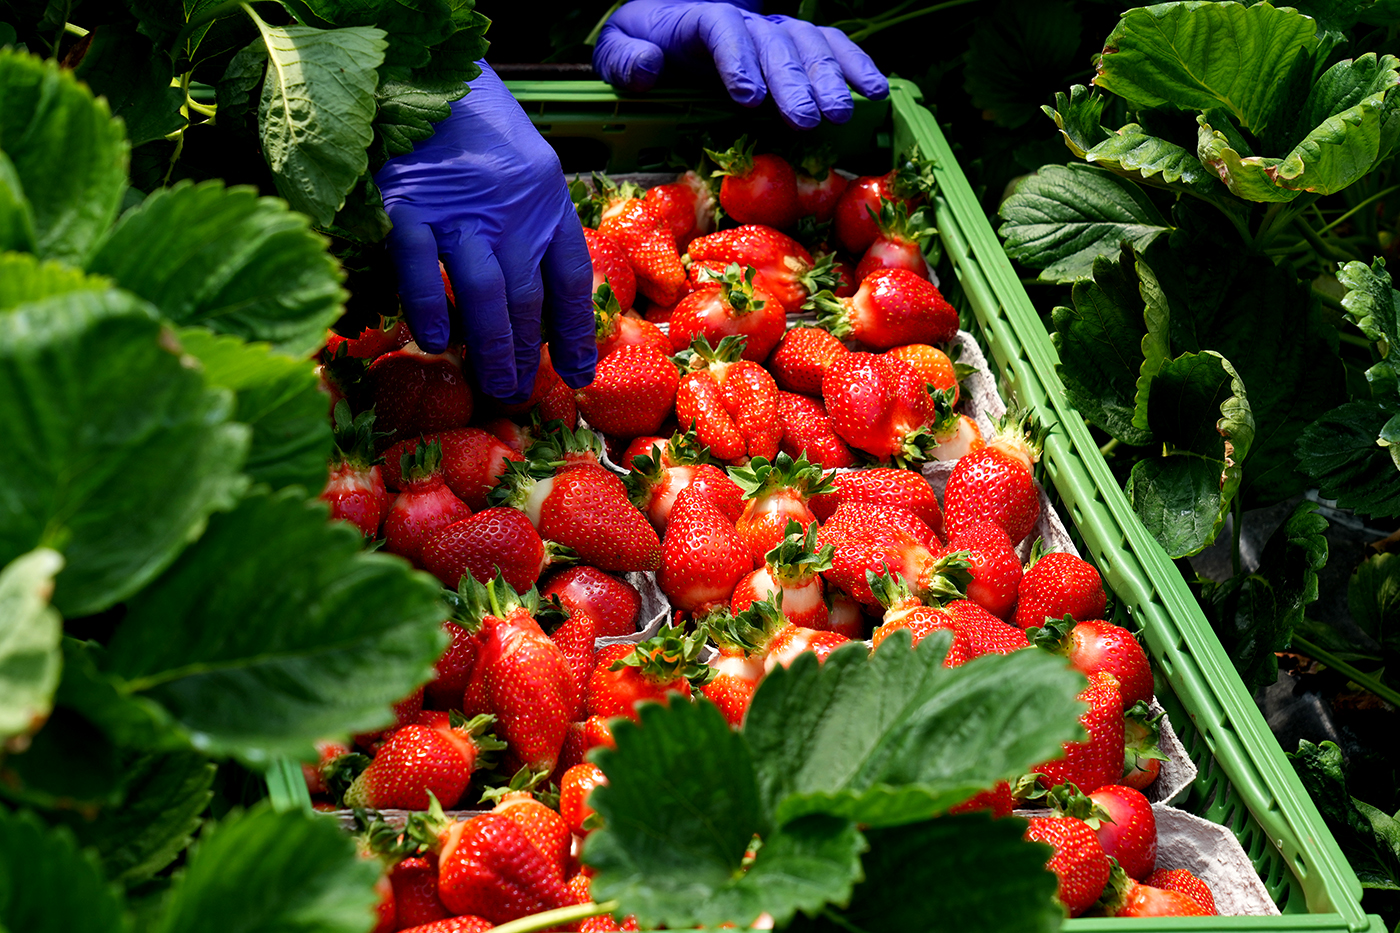 Revolutionize Your Fruit Harvesting With Hydroponic Strawberries And Other Fruits